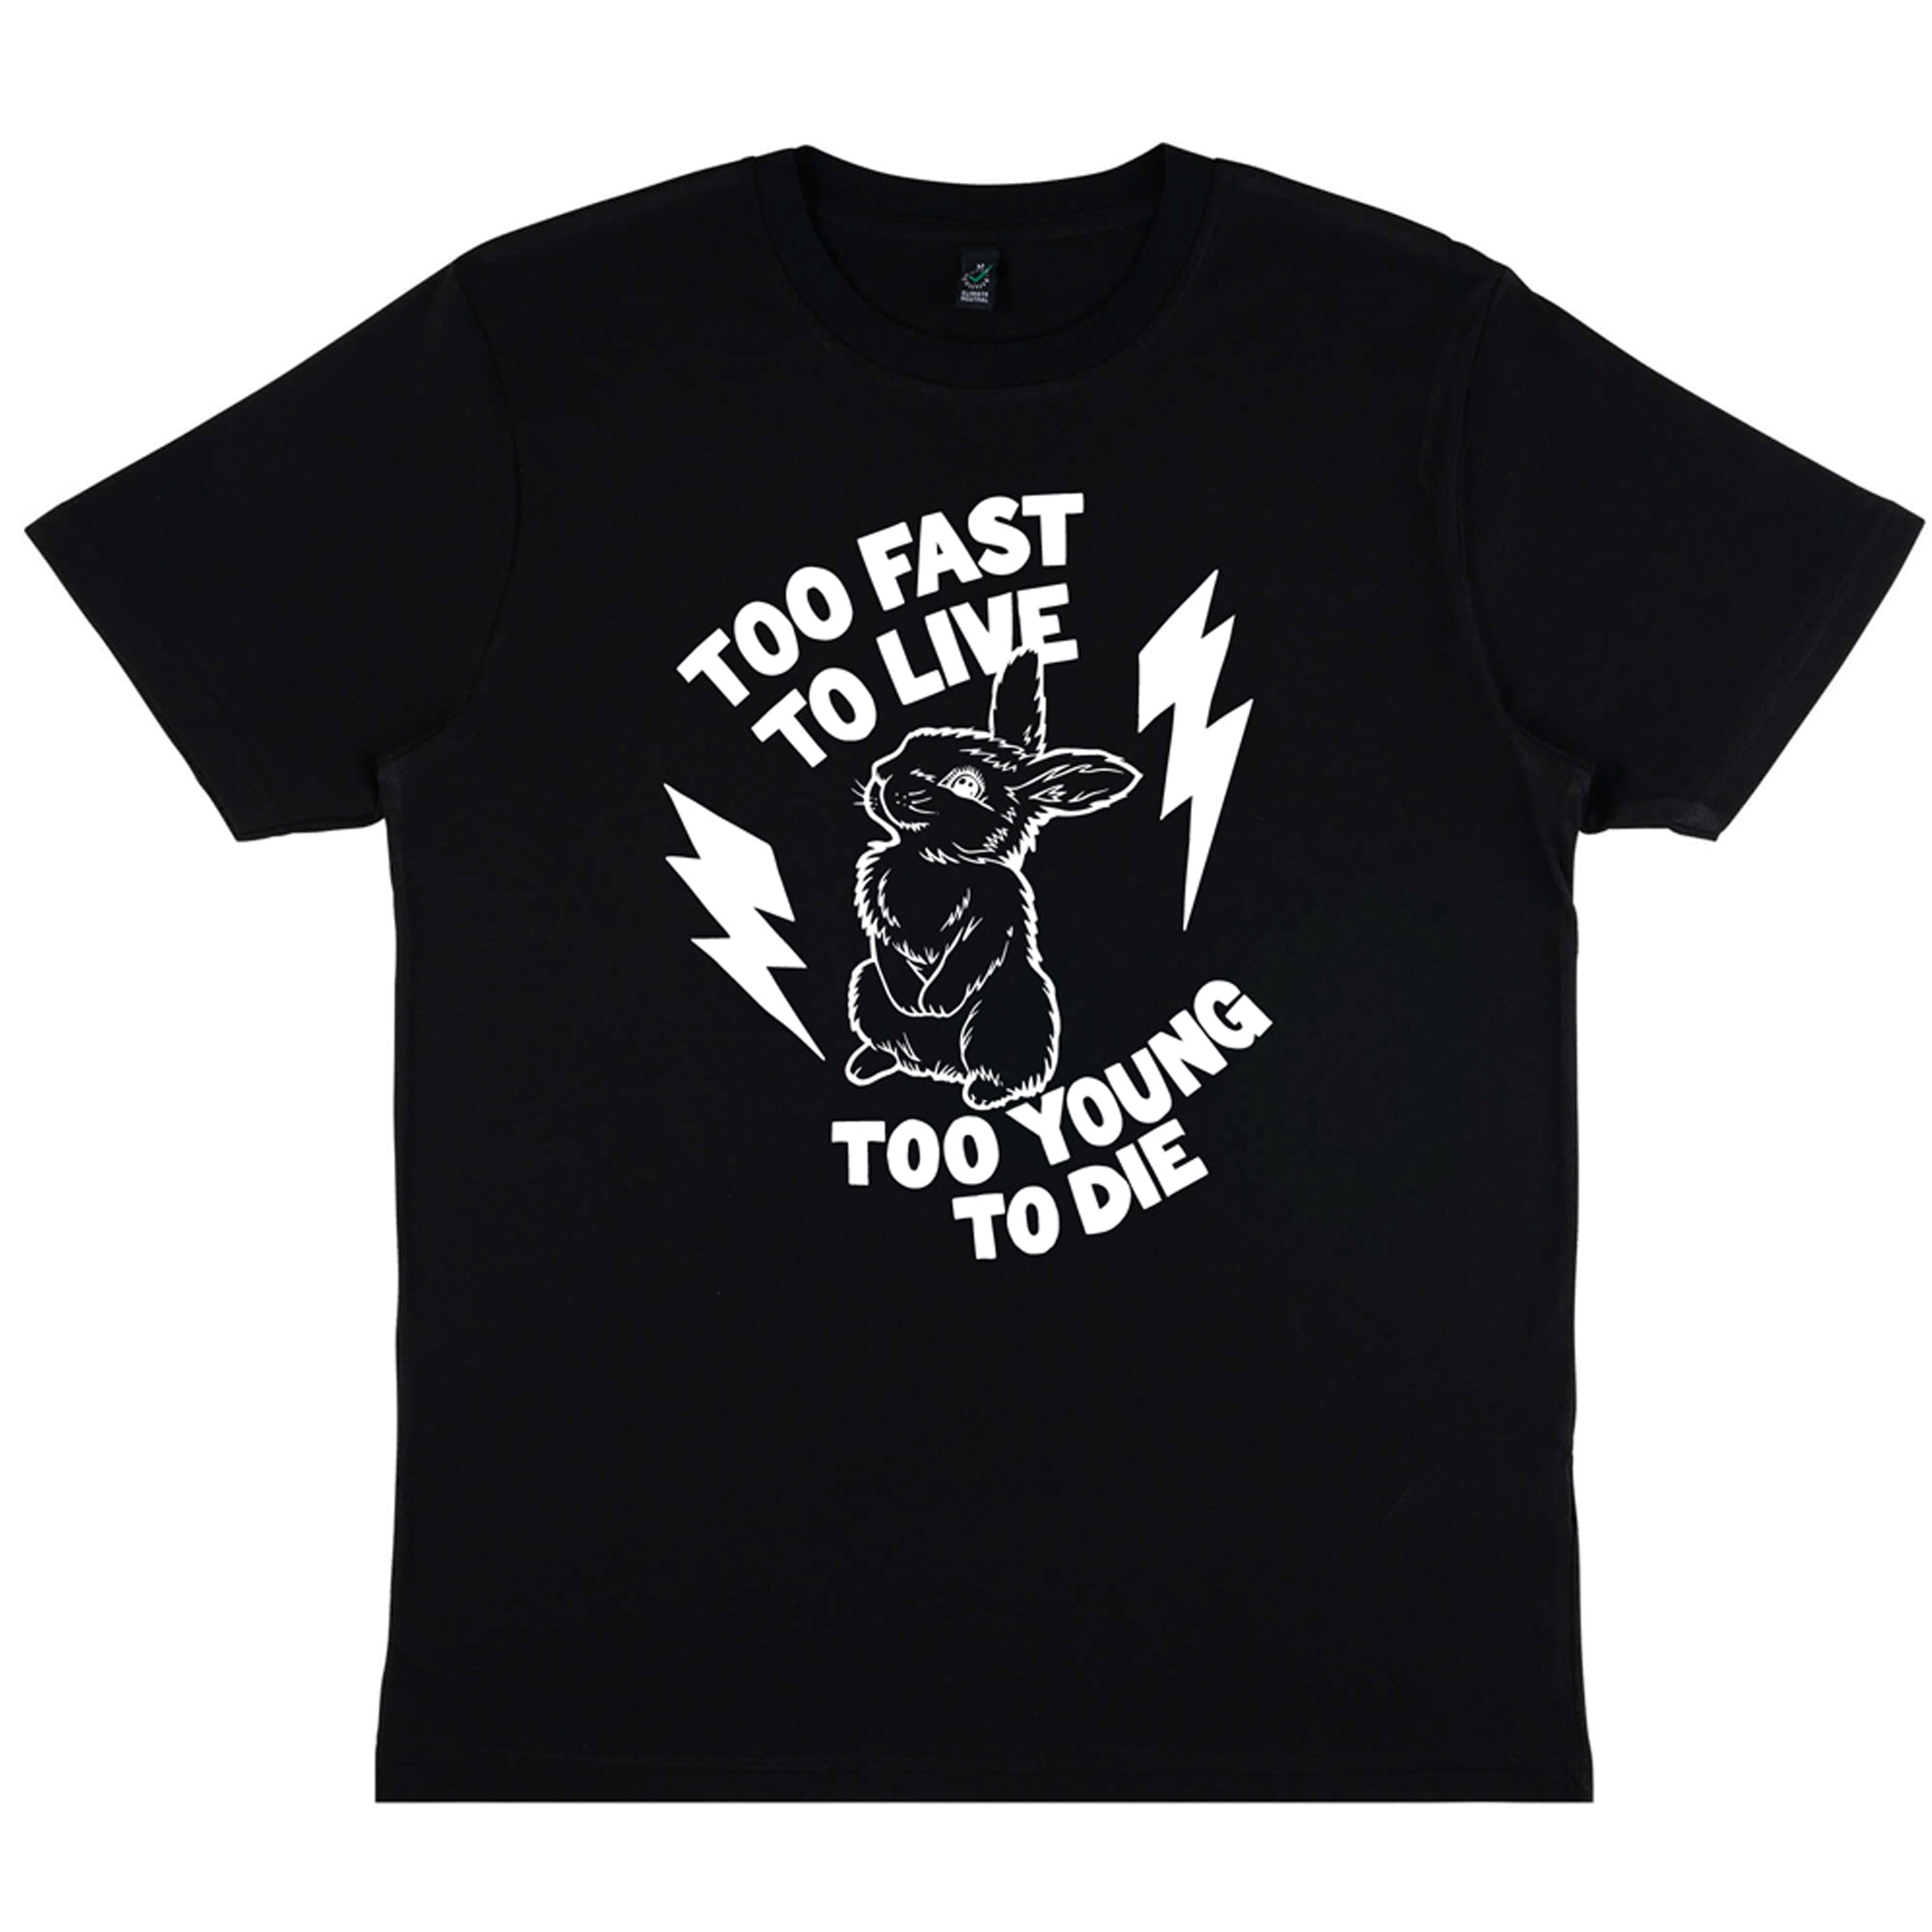 Too Fast To Live Unisex T-Shirt by db deadbeat